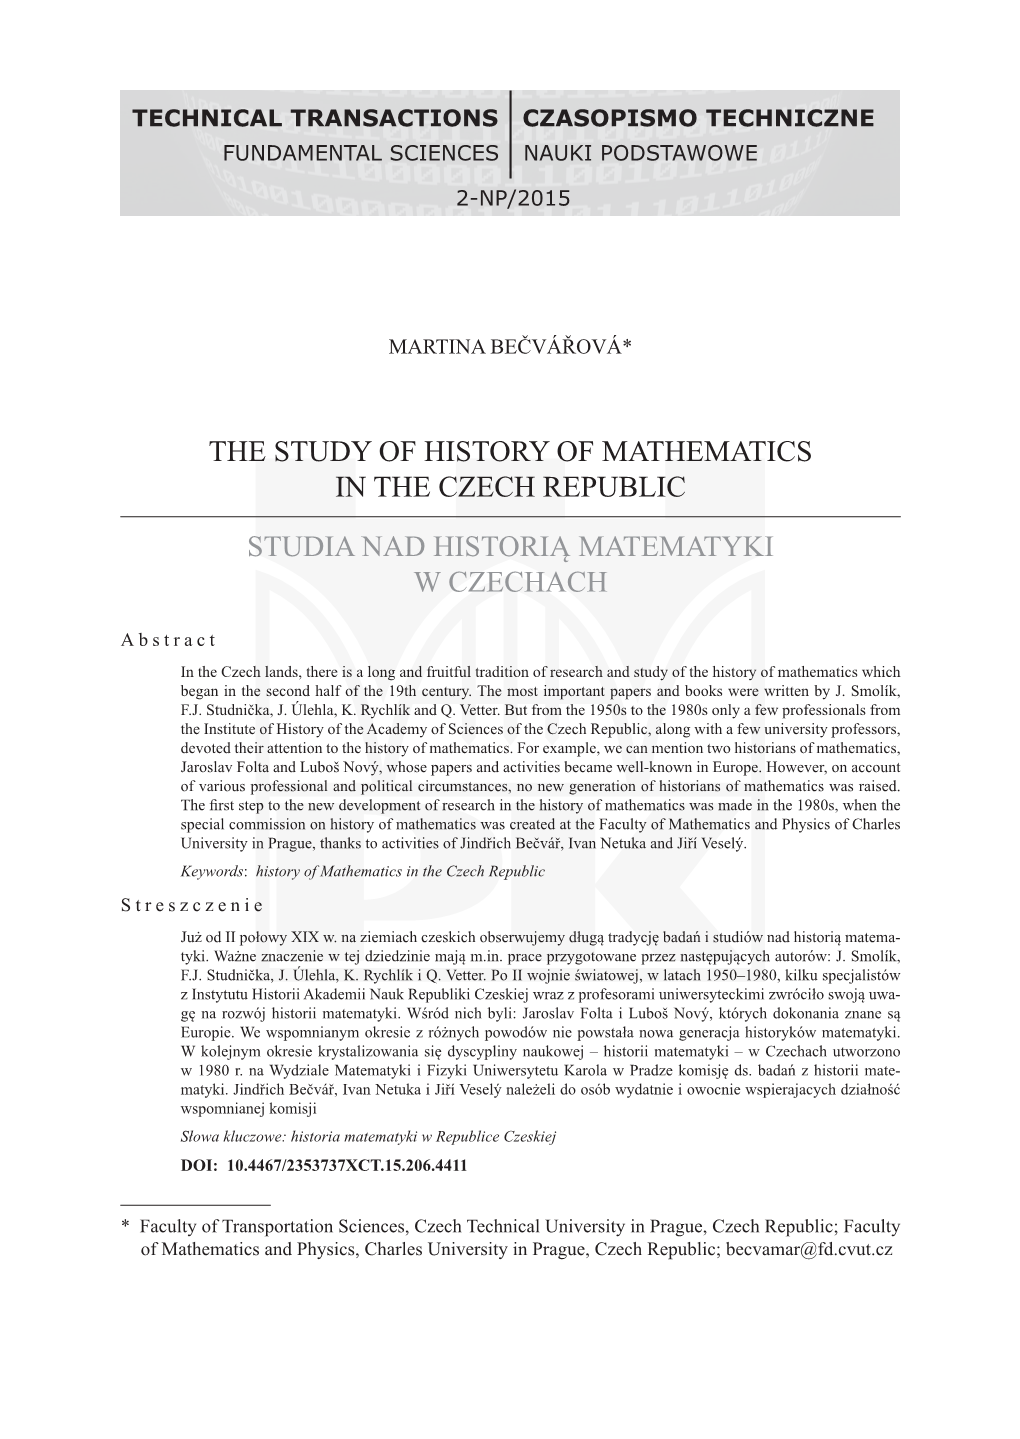 The Study of History of Mathematics in the Czech Republic